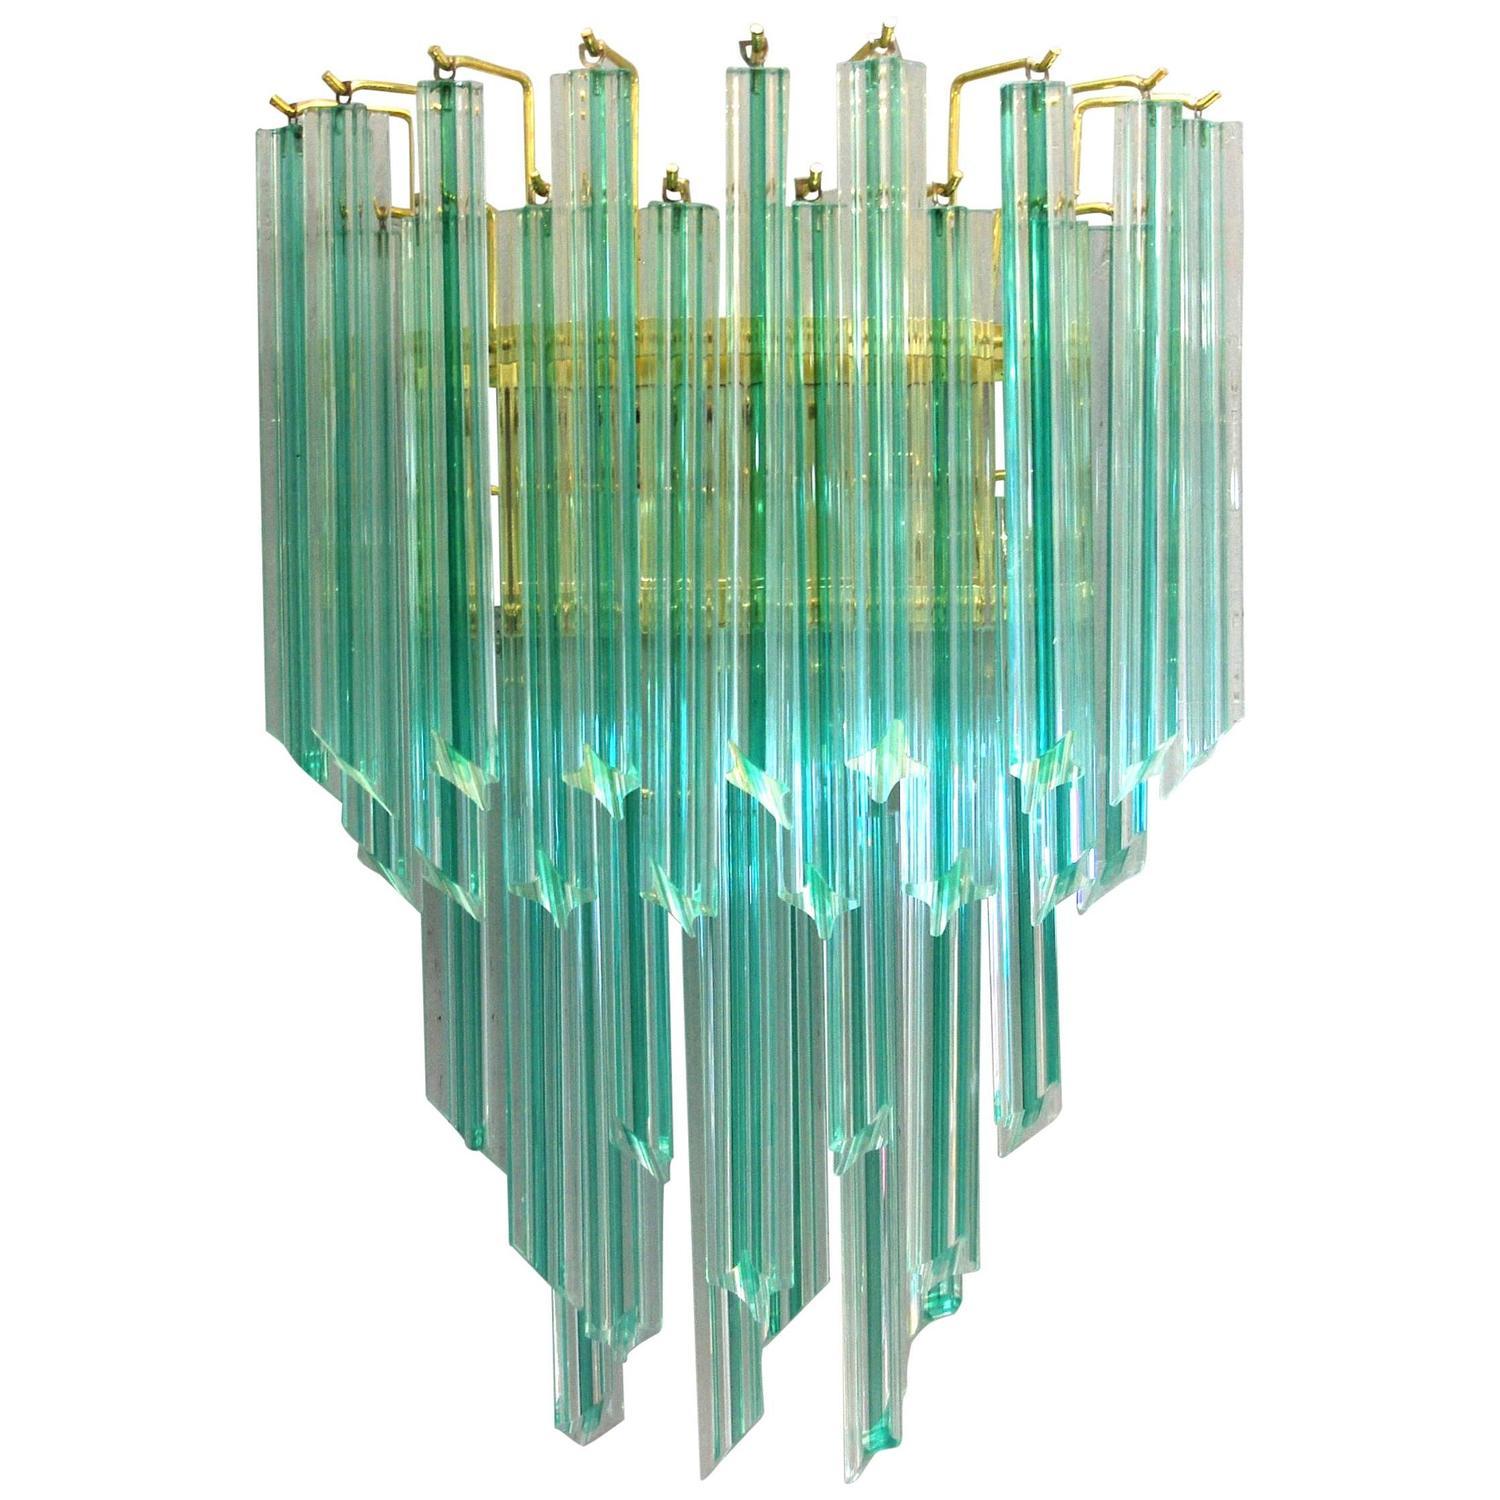 Vintage Italian wall lights with hand blown aquamarine Murano glass crystals cut into four points in Quadriedri technique, mounted on brass back plates / Designed by Venini, circa 1970’s / Made in Italy
2 lights / E12 or E14 type / max 40W